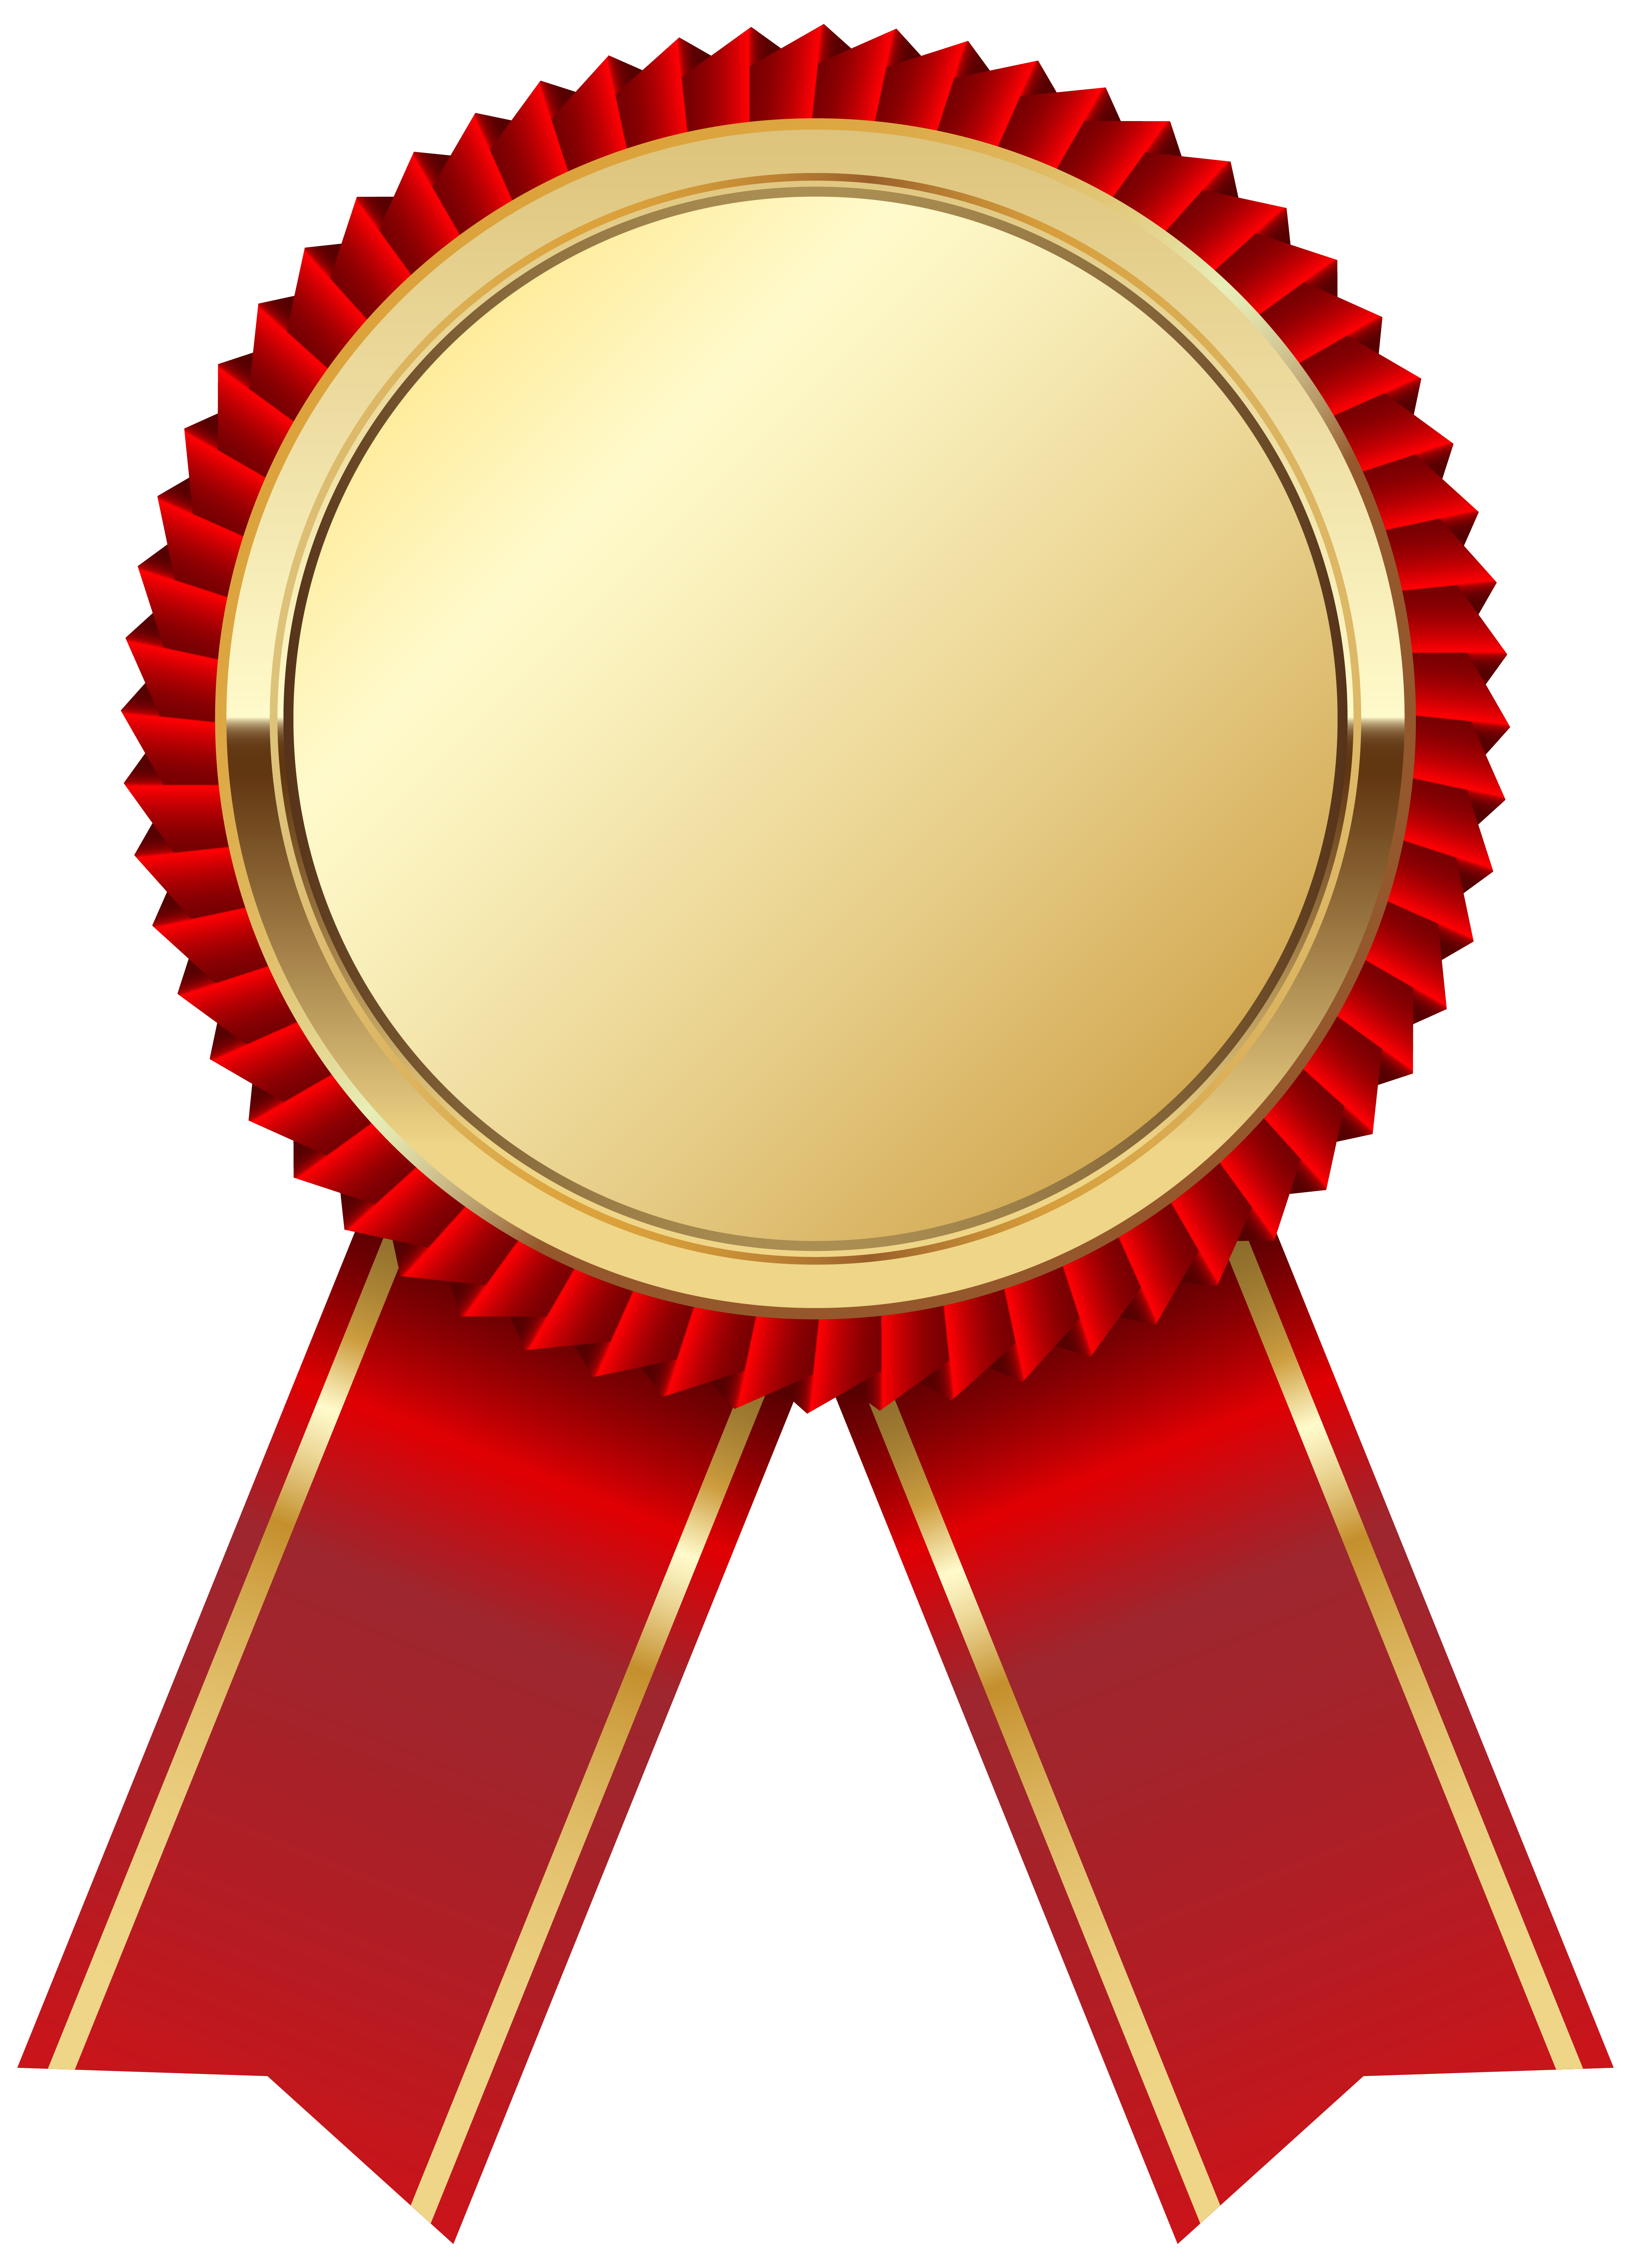 Gold Medal with Red Ribbon PNG Clipart Picture